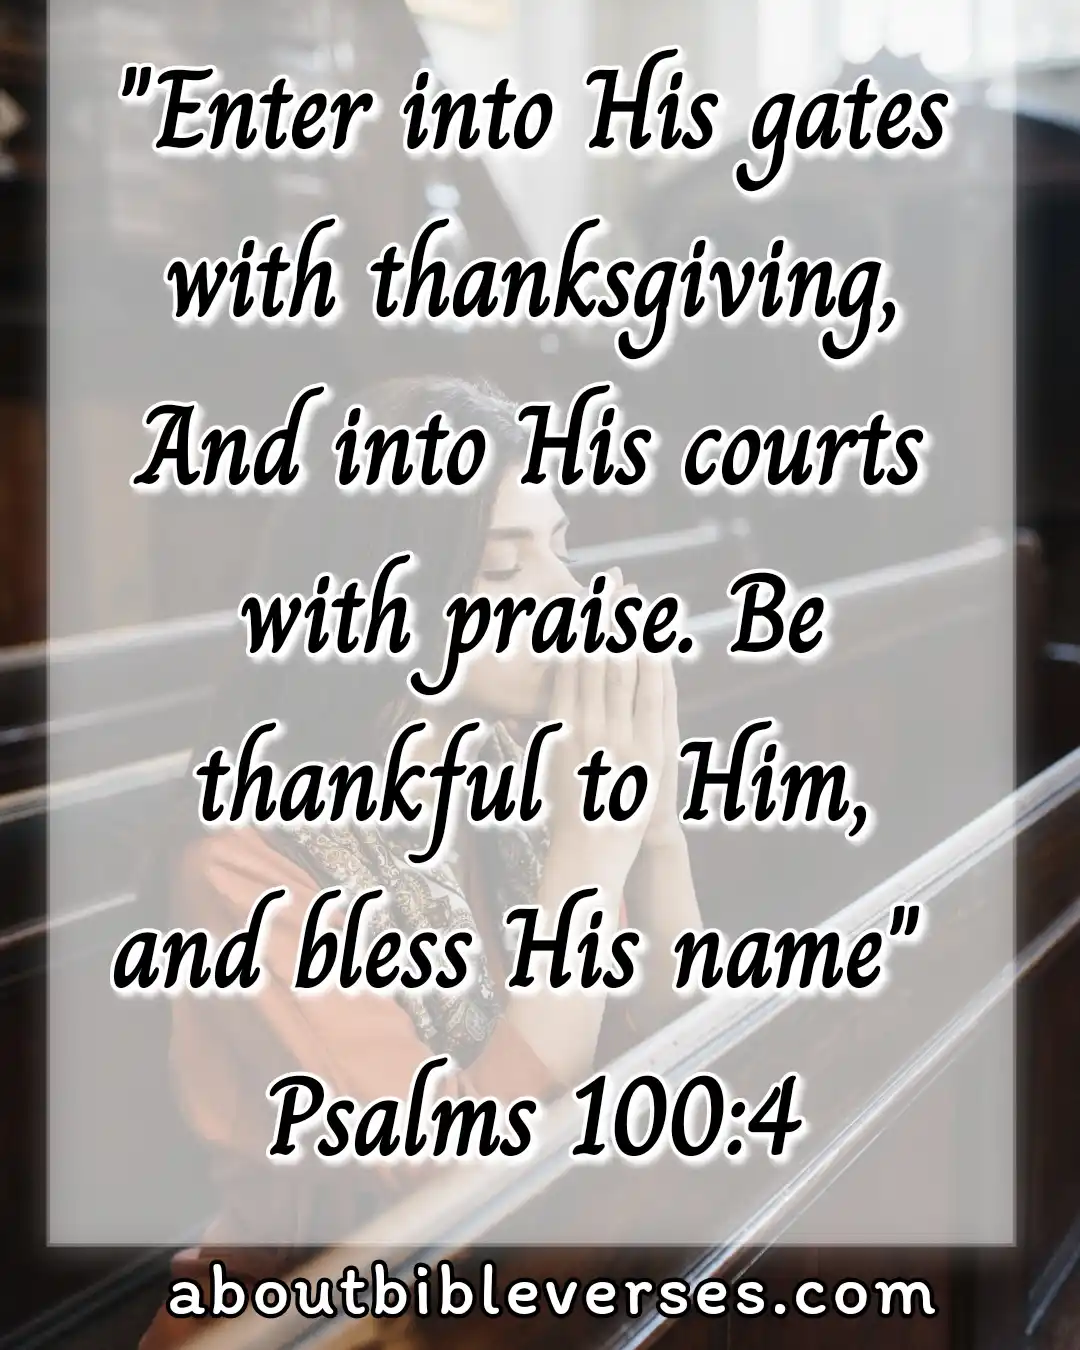 Bible Verses About Giving Thanks To God (Psalm 100:4)